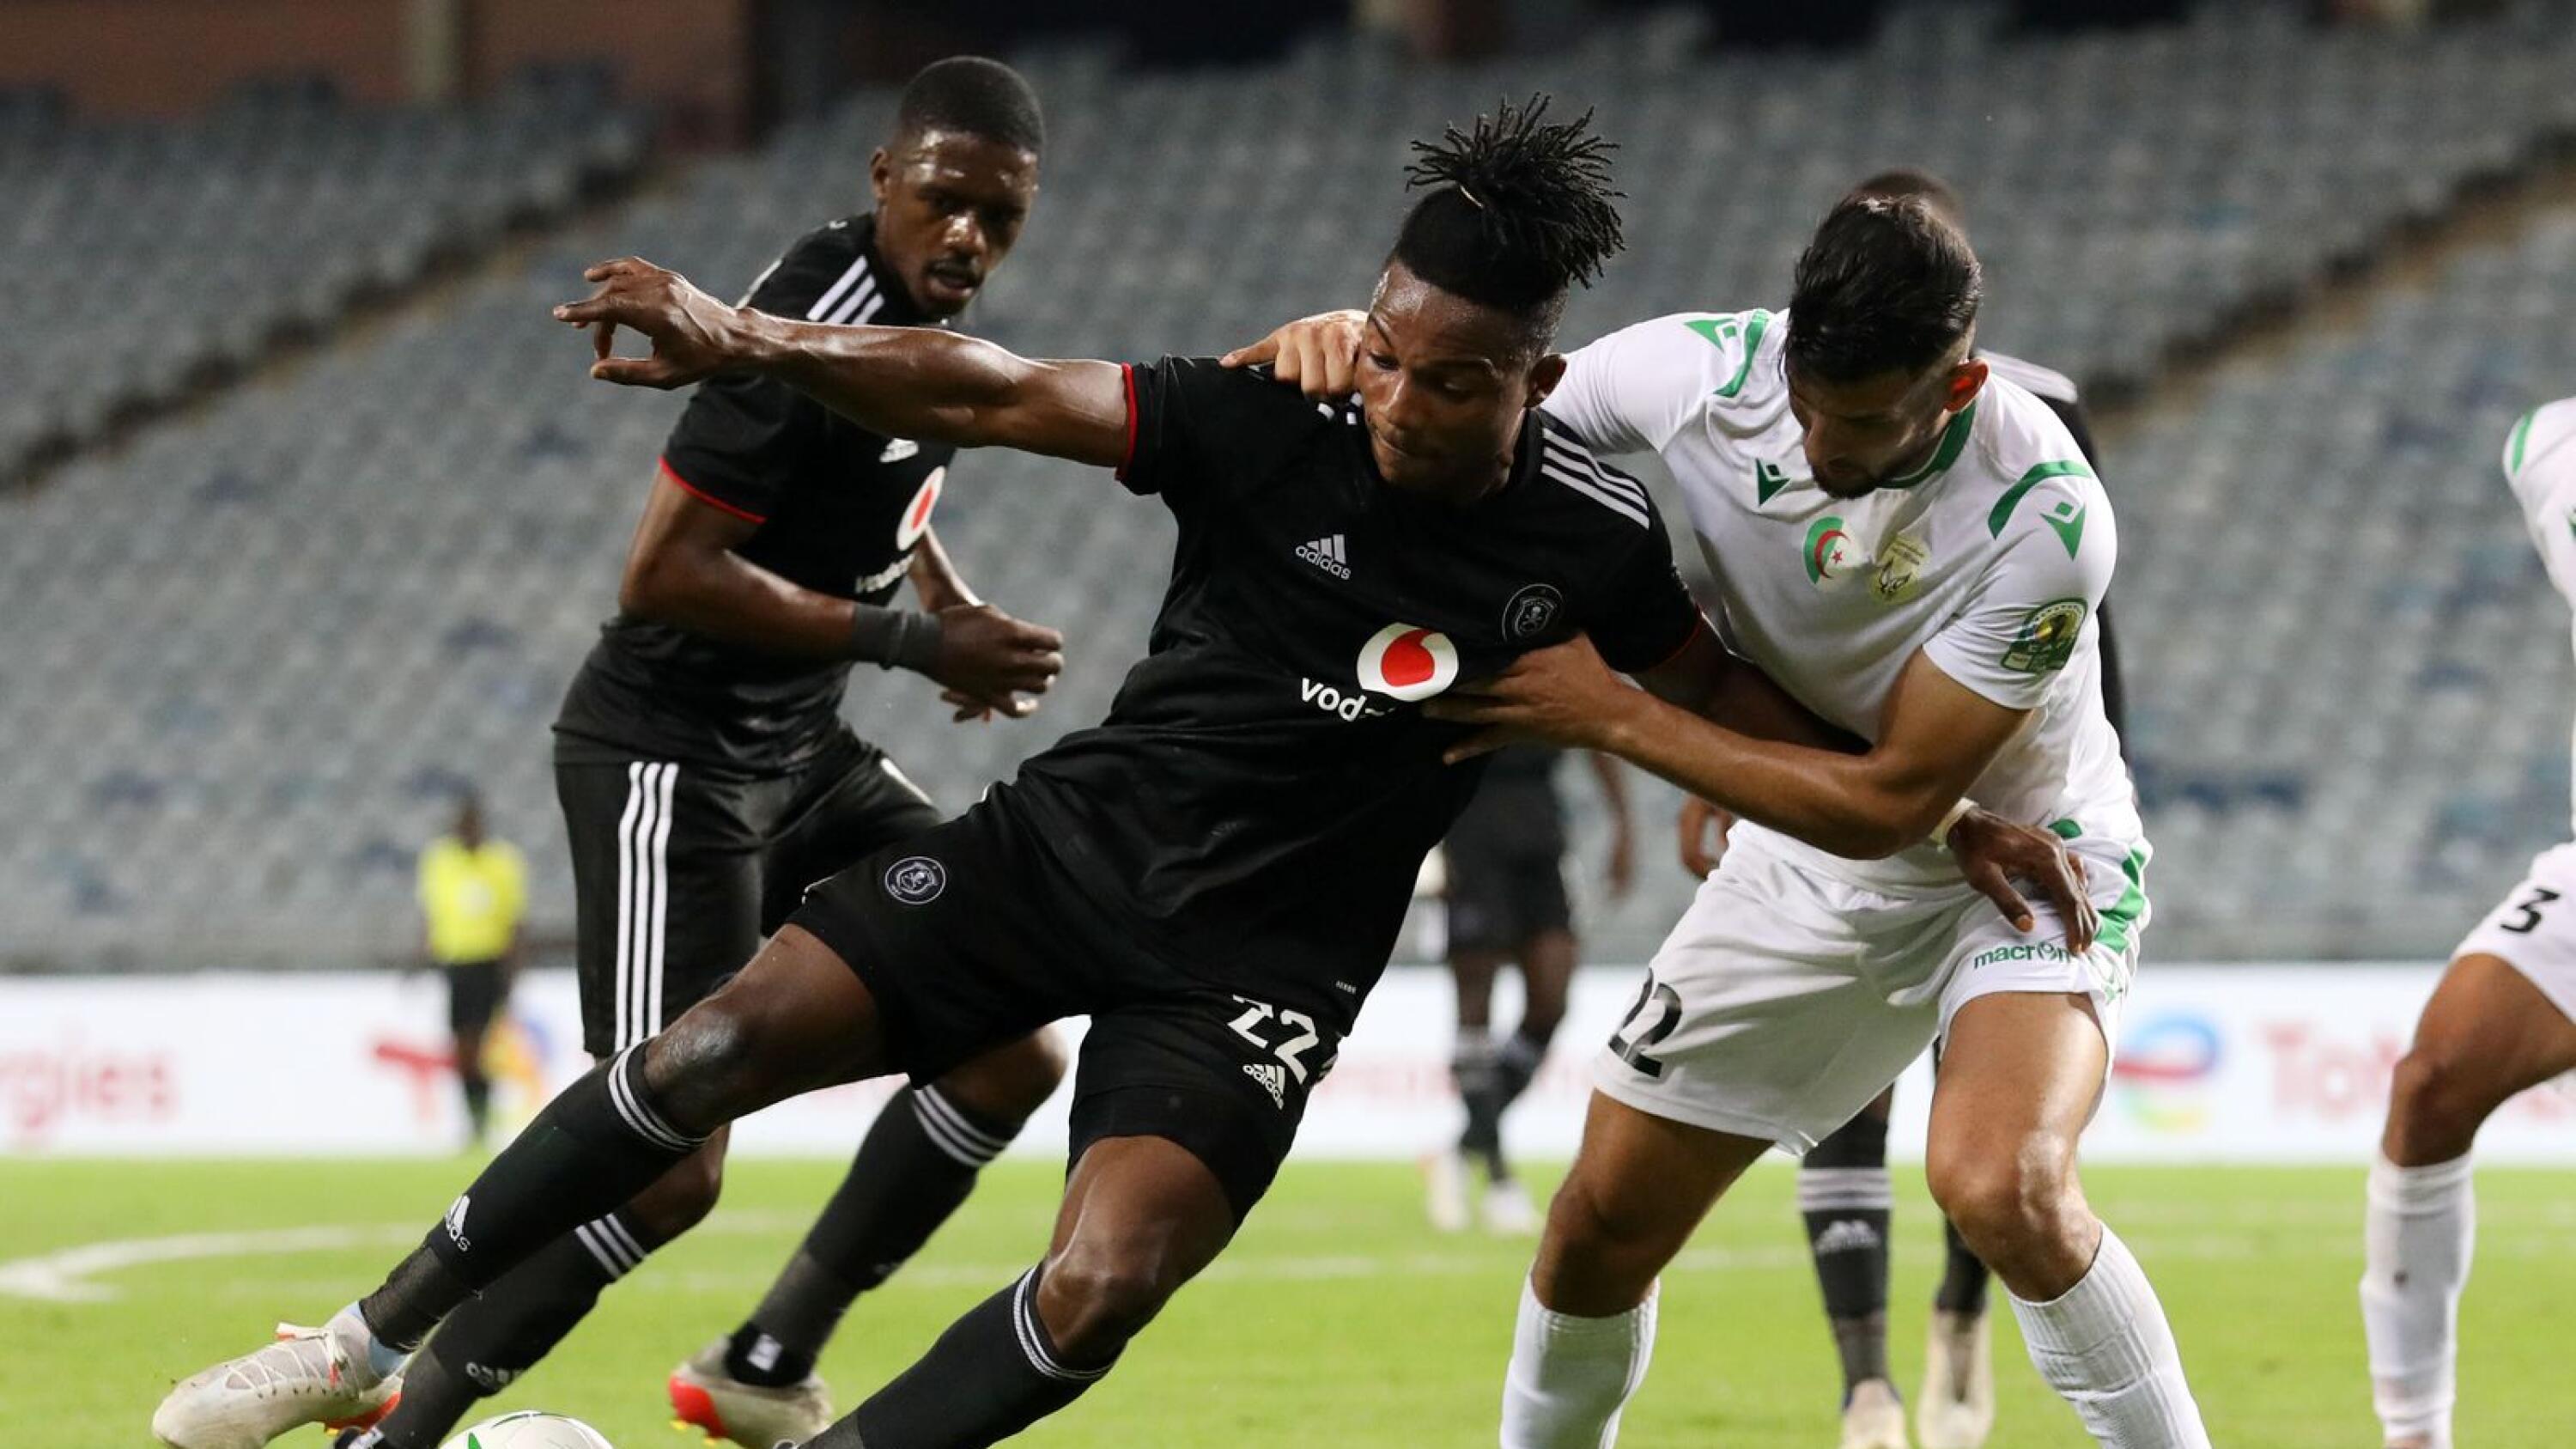 Kwame Peprah of Orlando Pirates shields the ball from Imadeddine Boubekeur of JS Saoura during their CAF Confederation Cup match at Orlando Stadium in Soweto on Sunday